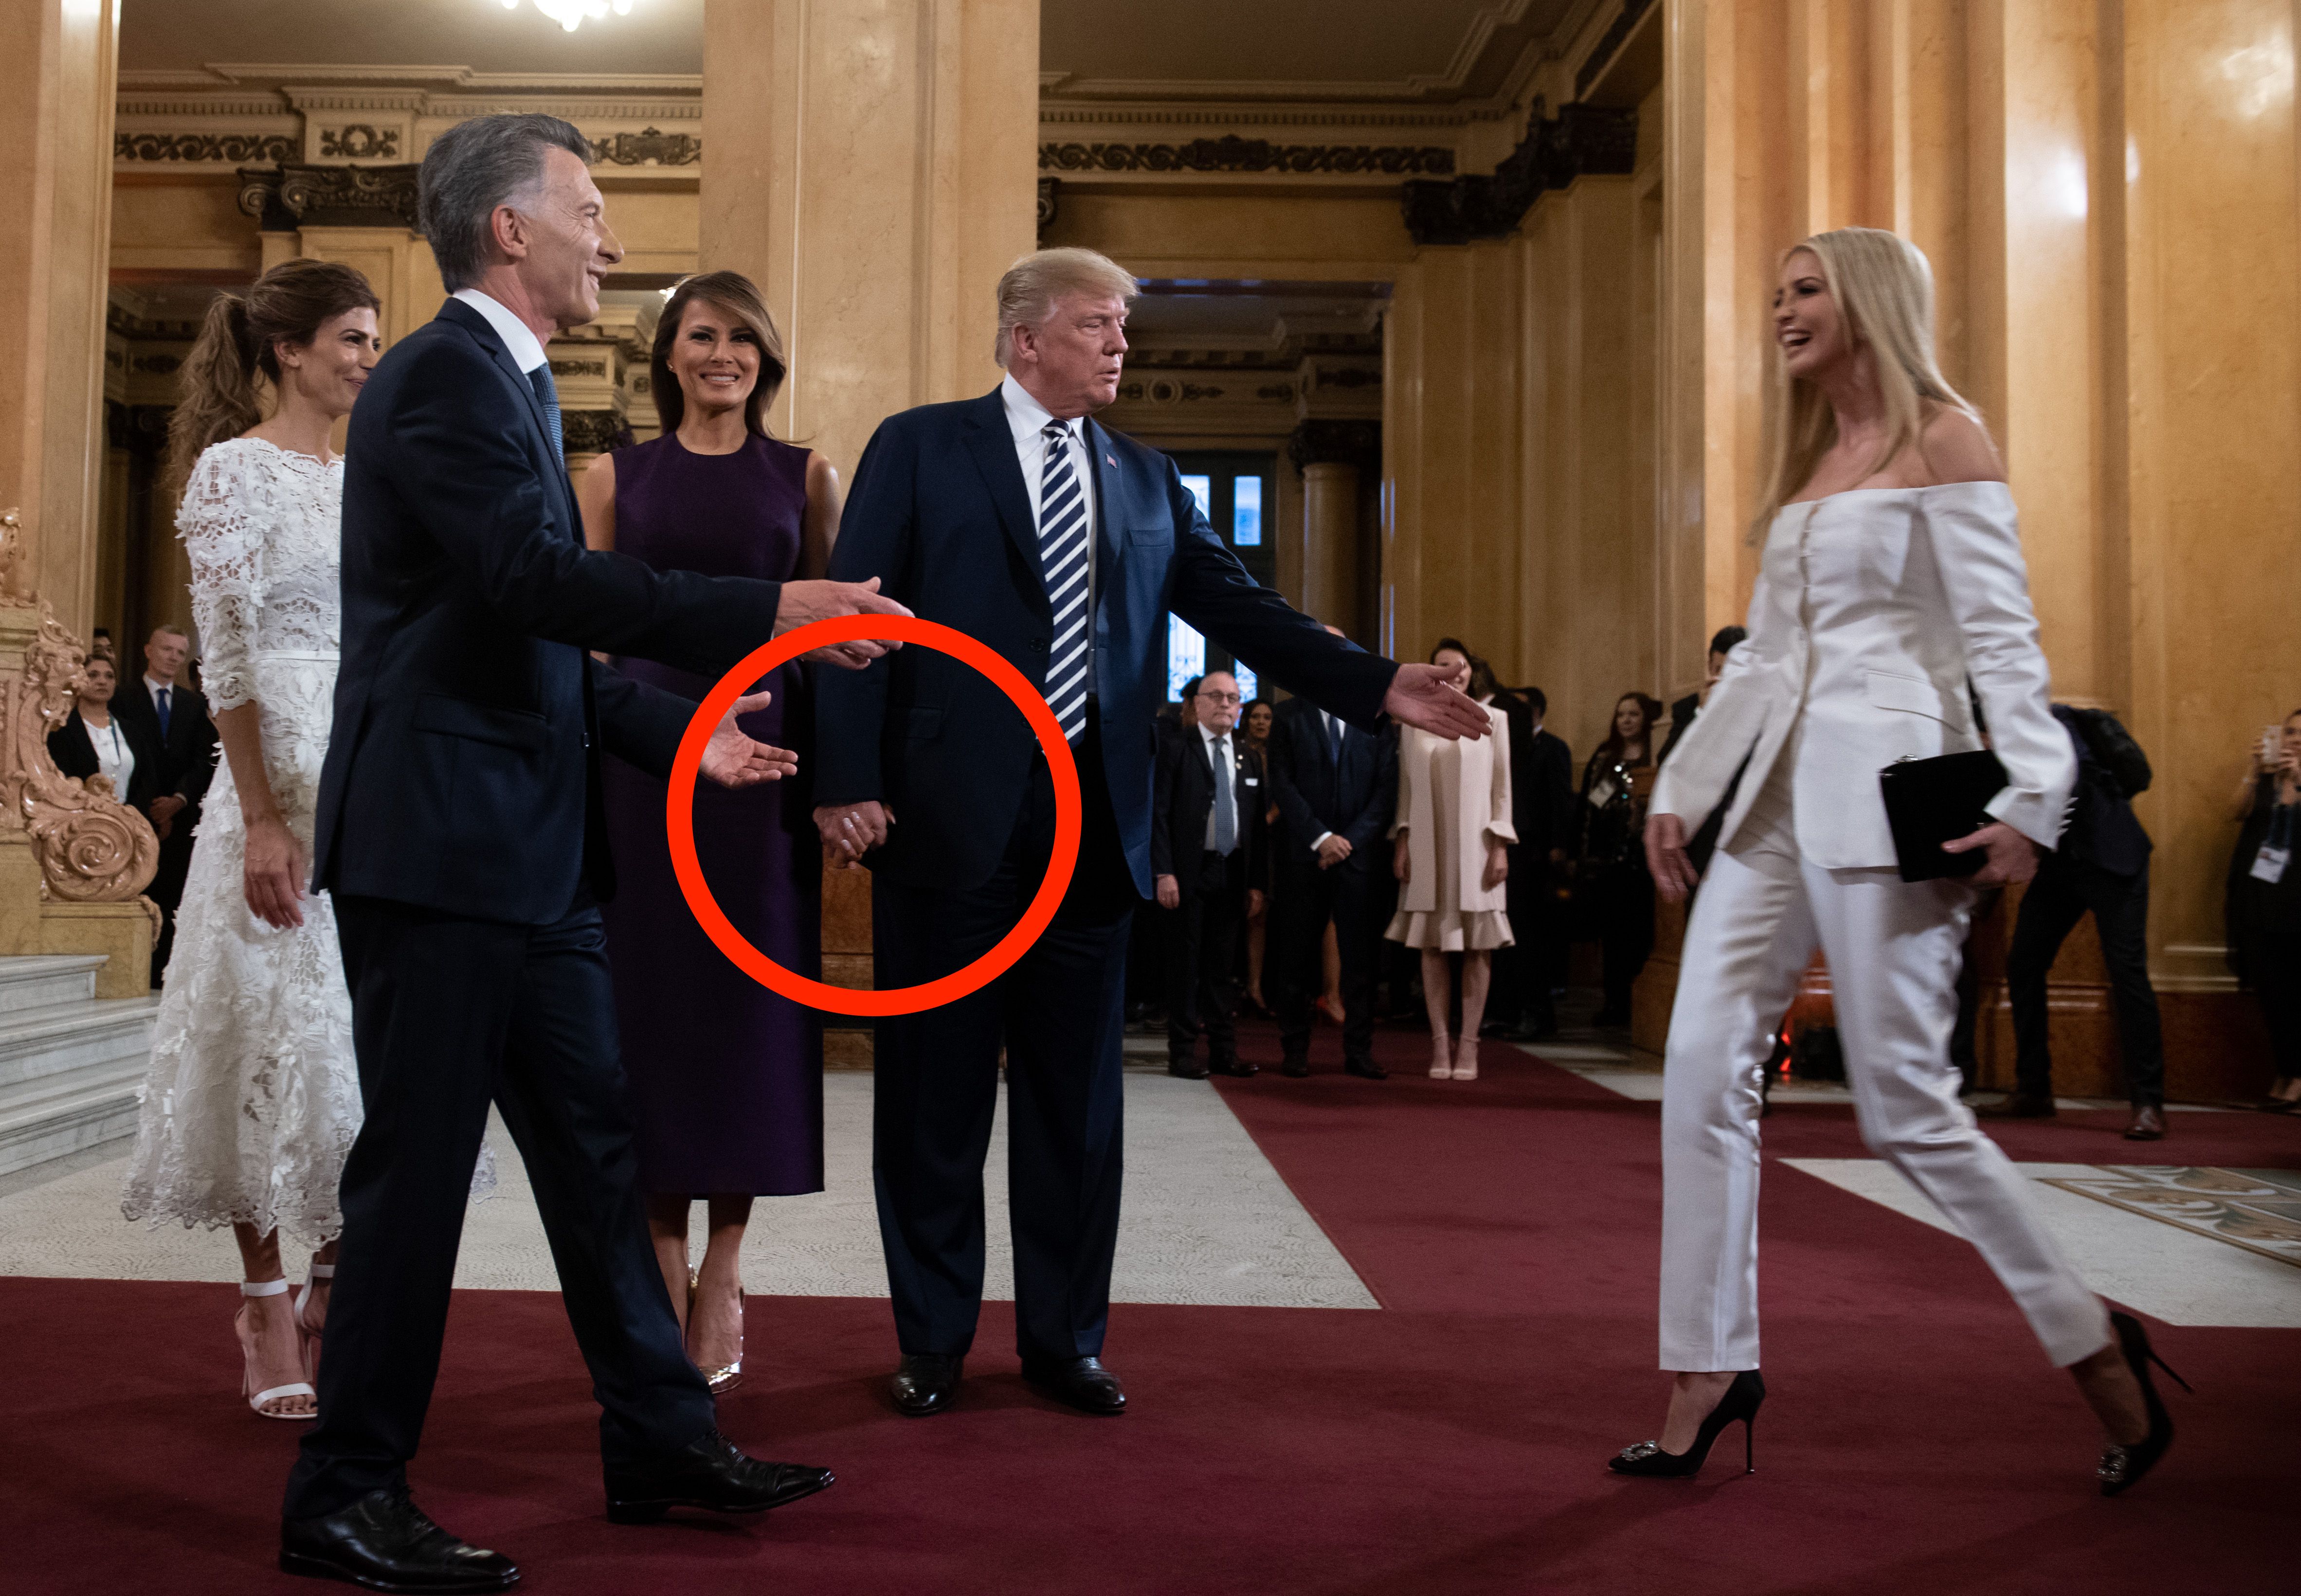 US President Donald Trump (C) calls her daughter White House adviser Ivanka Trump to join her wife US First Lady Melania Trump (3-L), Argentina's President Mauricio Macri (2-L) and his wife Argentina's First Lady Juliana Awada (L), prior to a gala at the Colon Theater in Buenos Aires, on November 30, 2018 in the sidelines of the G20 Leader's Summit. LOEB/AFP/Getty Images